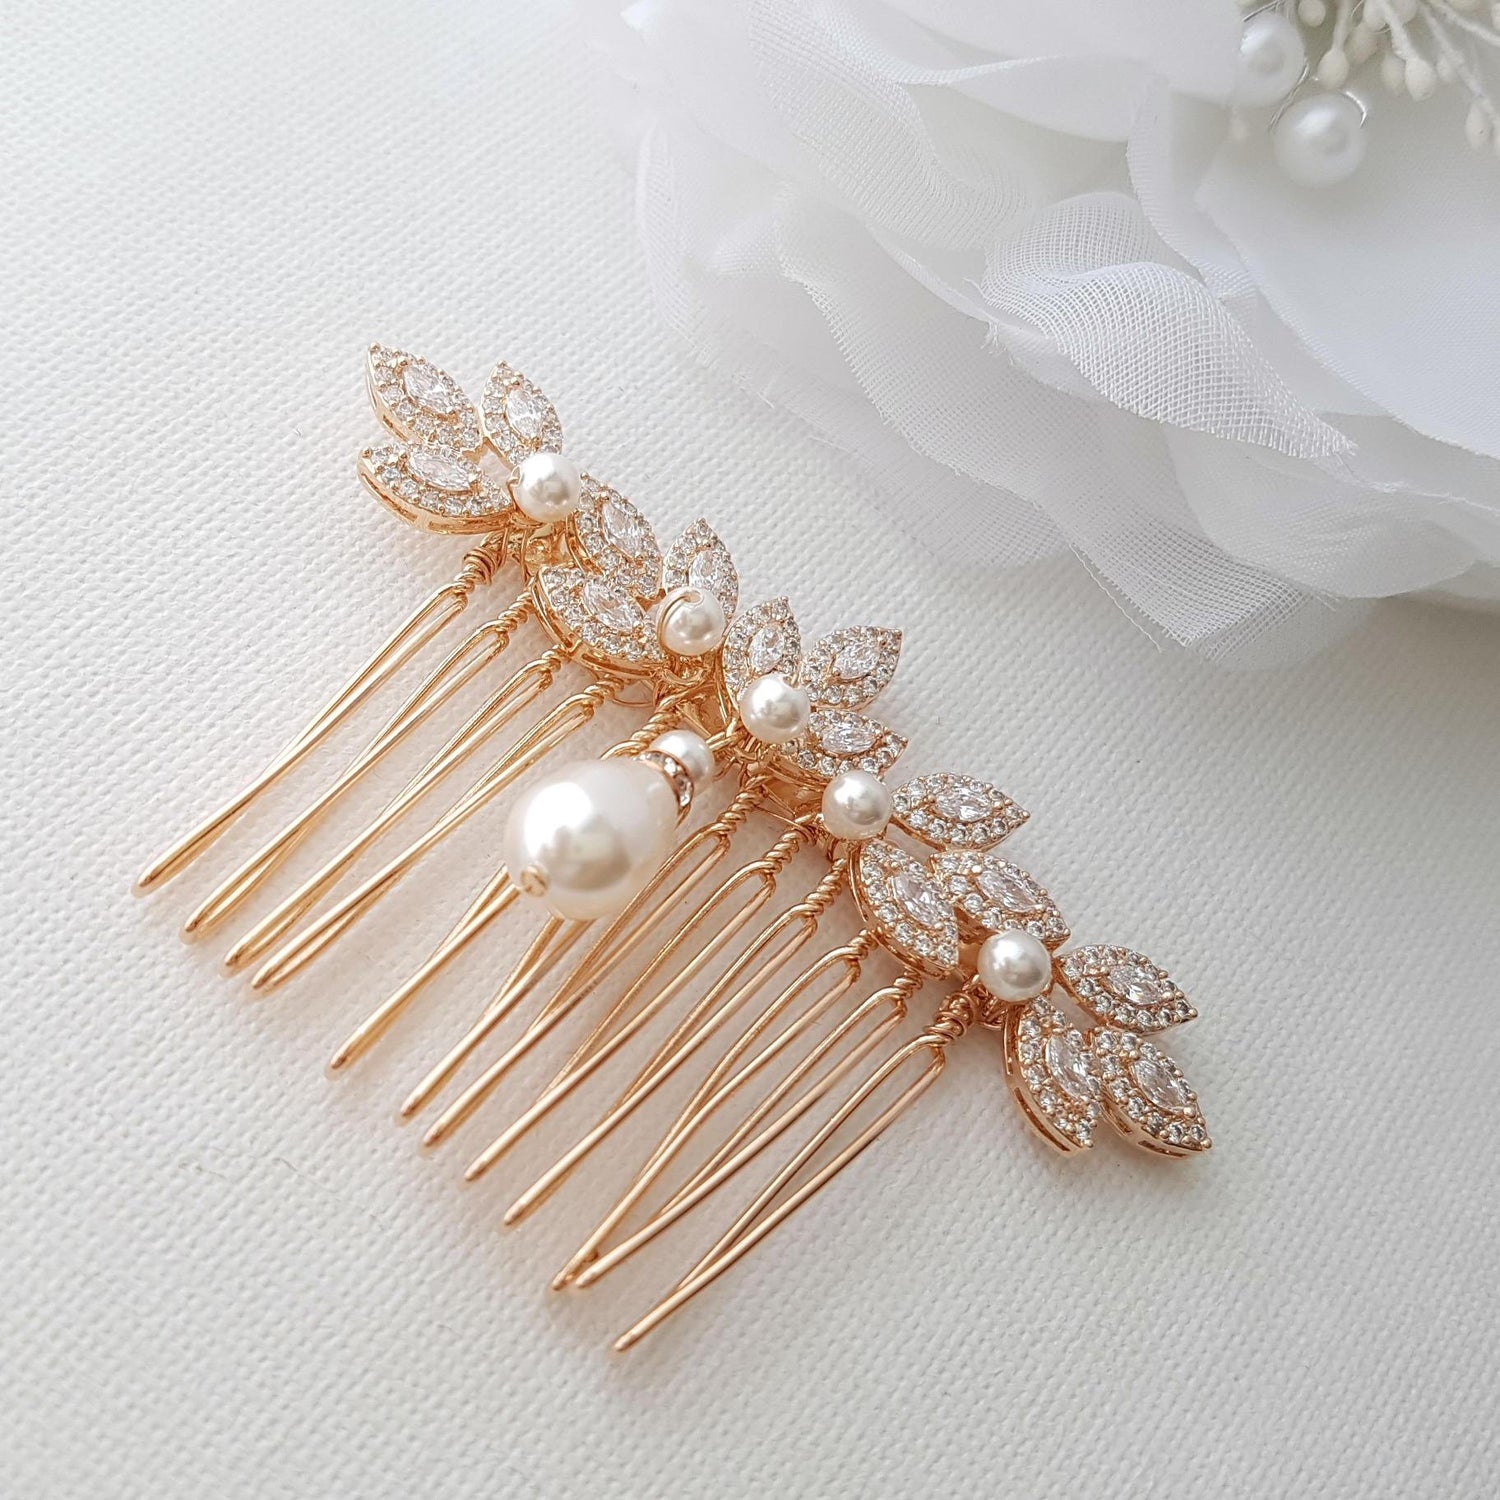 Rose Gold Hair Comb, Crystal Leaf Hair Comb, Wedding Hair Comb, Rose Gold Headpiece, Pearl Drop, Crystal Hair Comb, Gold Hair Comb, Abby - PoetryDesigns